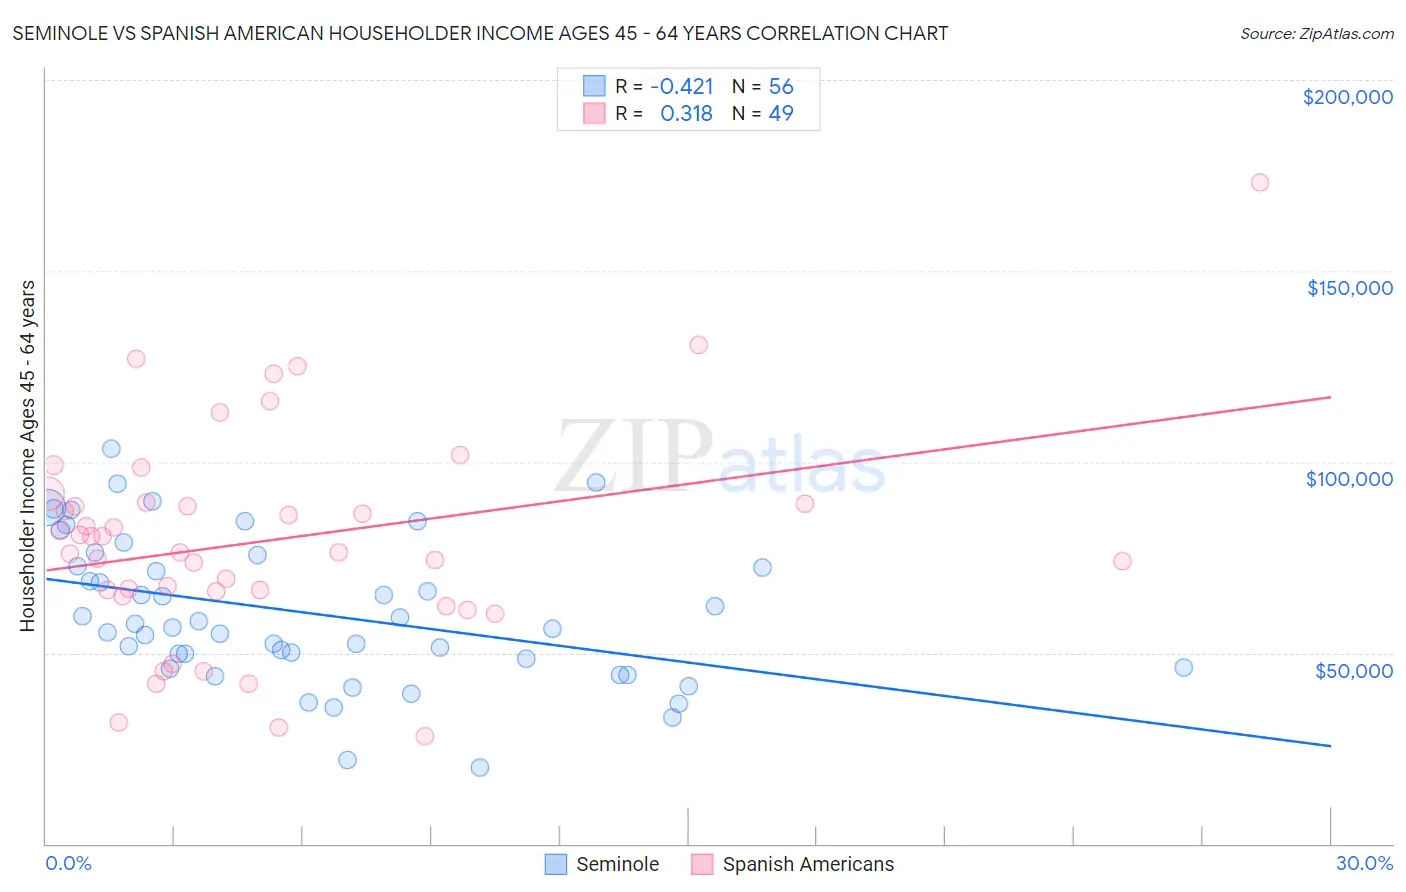 Seminole vs Spanish American Householder Income Ages 45 - 64 years